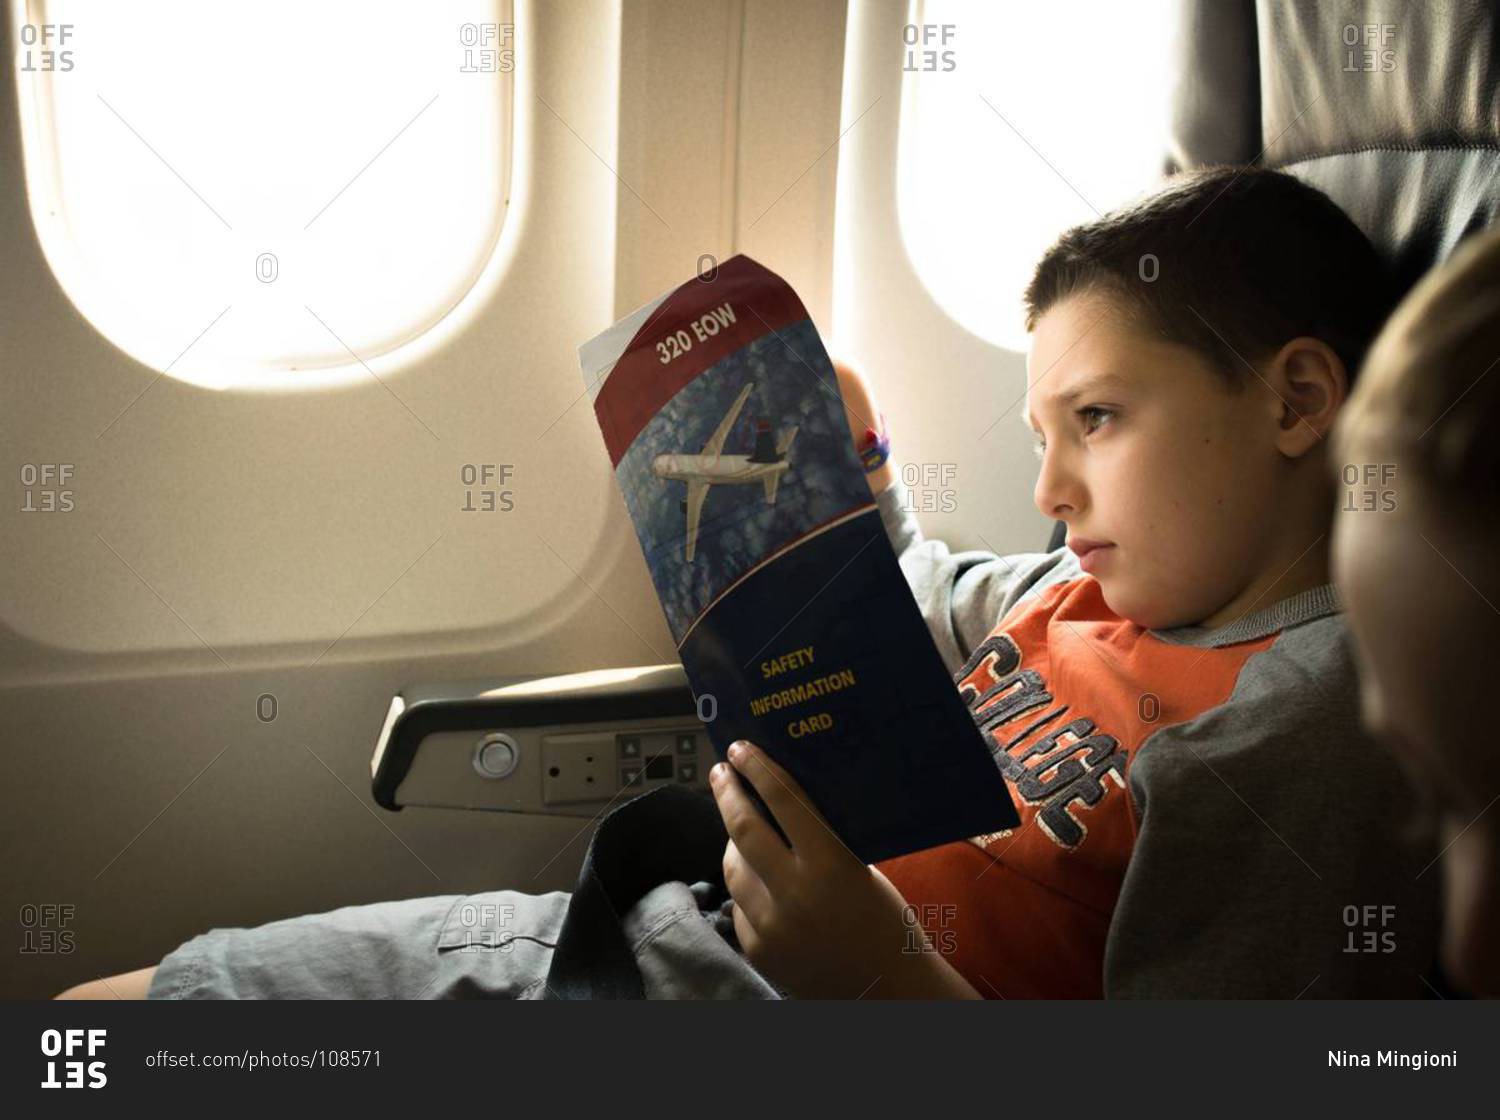 Boy reading the safety information on an airplane